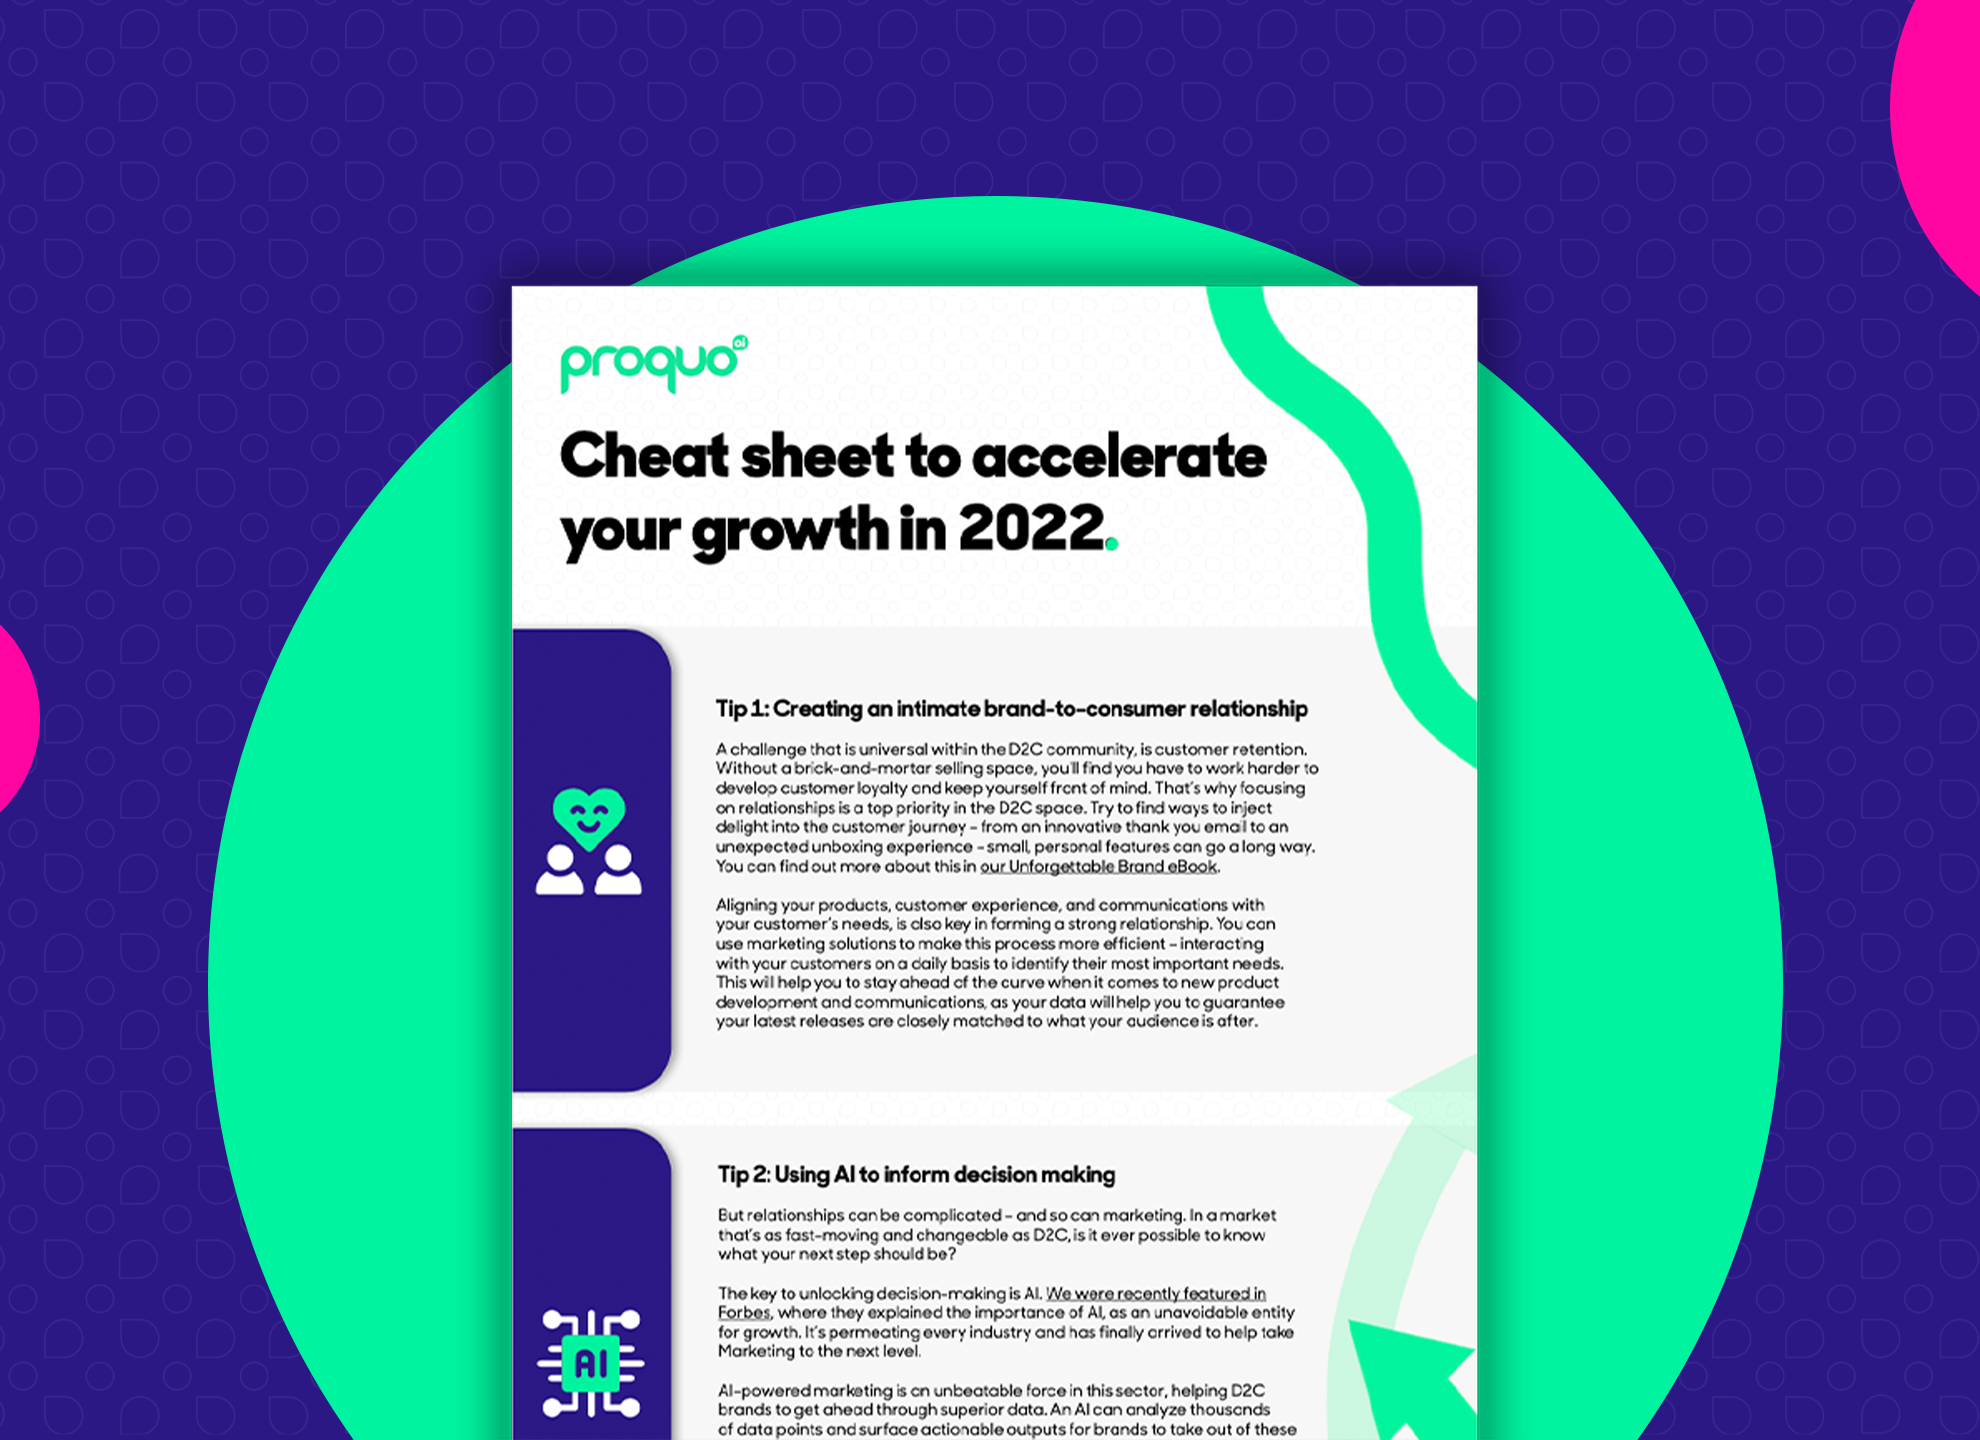 Brand Cheat Sheet: 3 Tips to Accelerate Growth in 2022